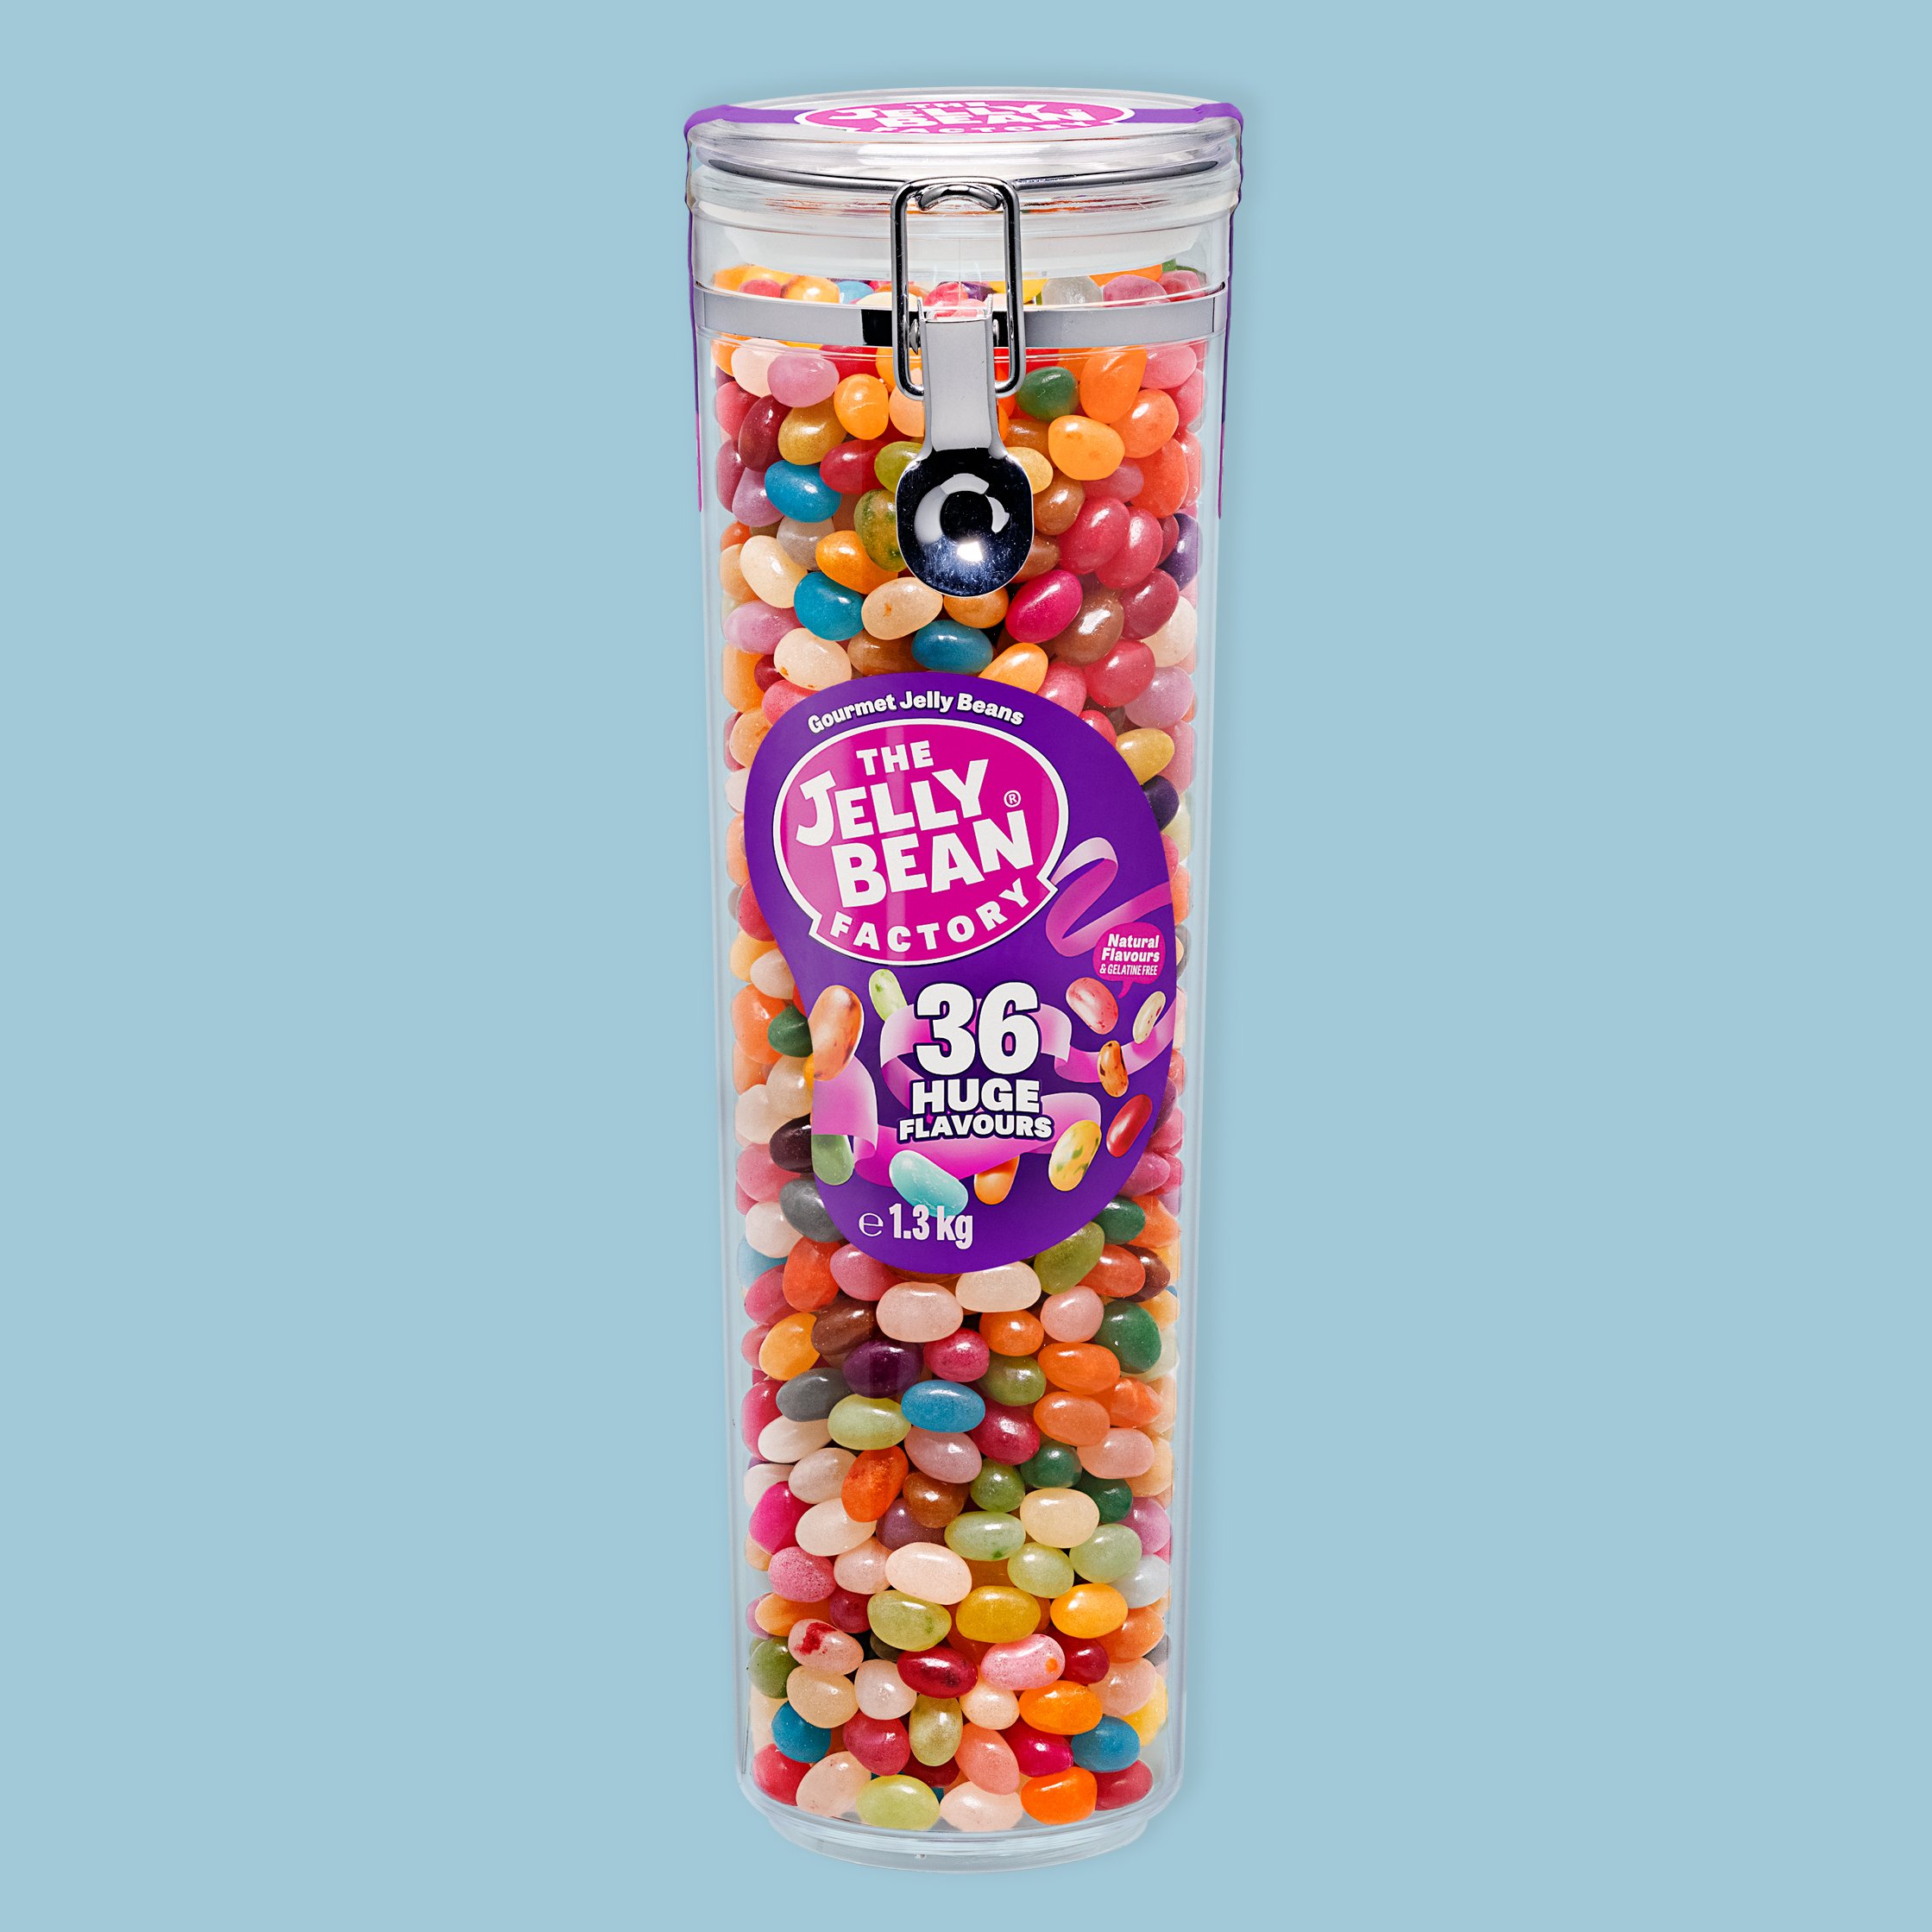 The Jelly Bean Factory Jelly Bean Factory 1.3Kg Jar Sweets